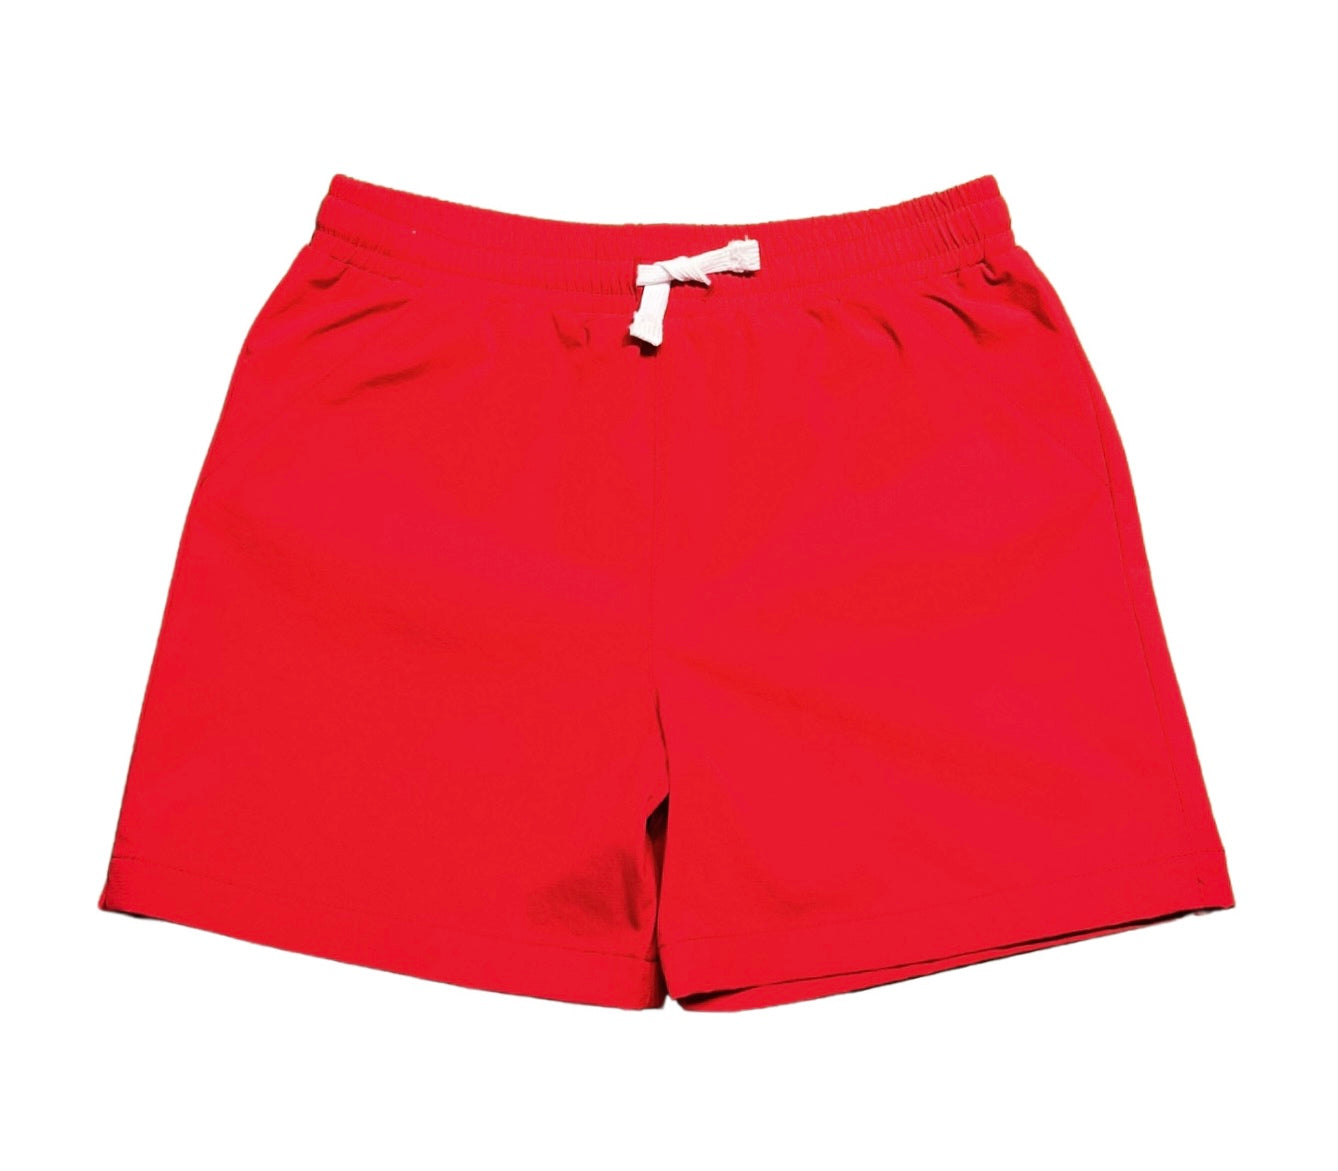 TOPSAIL PERFORMANCE SHORT RED